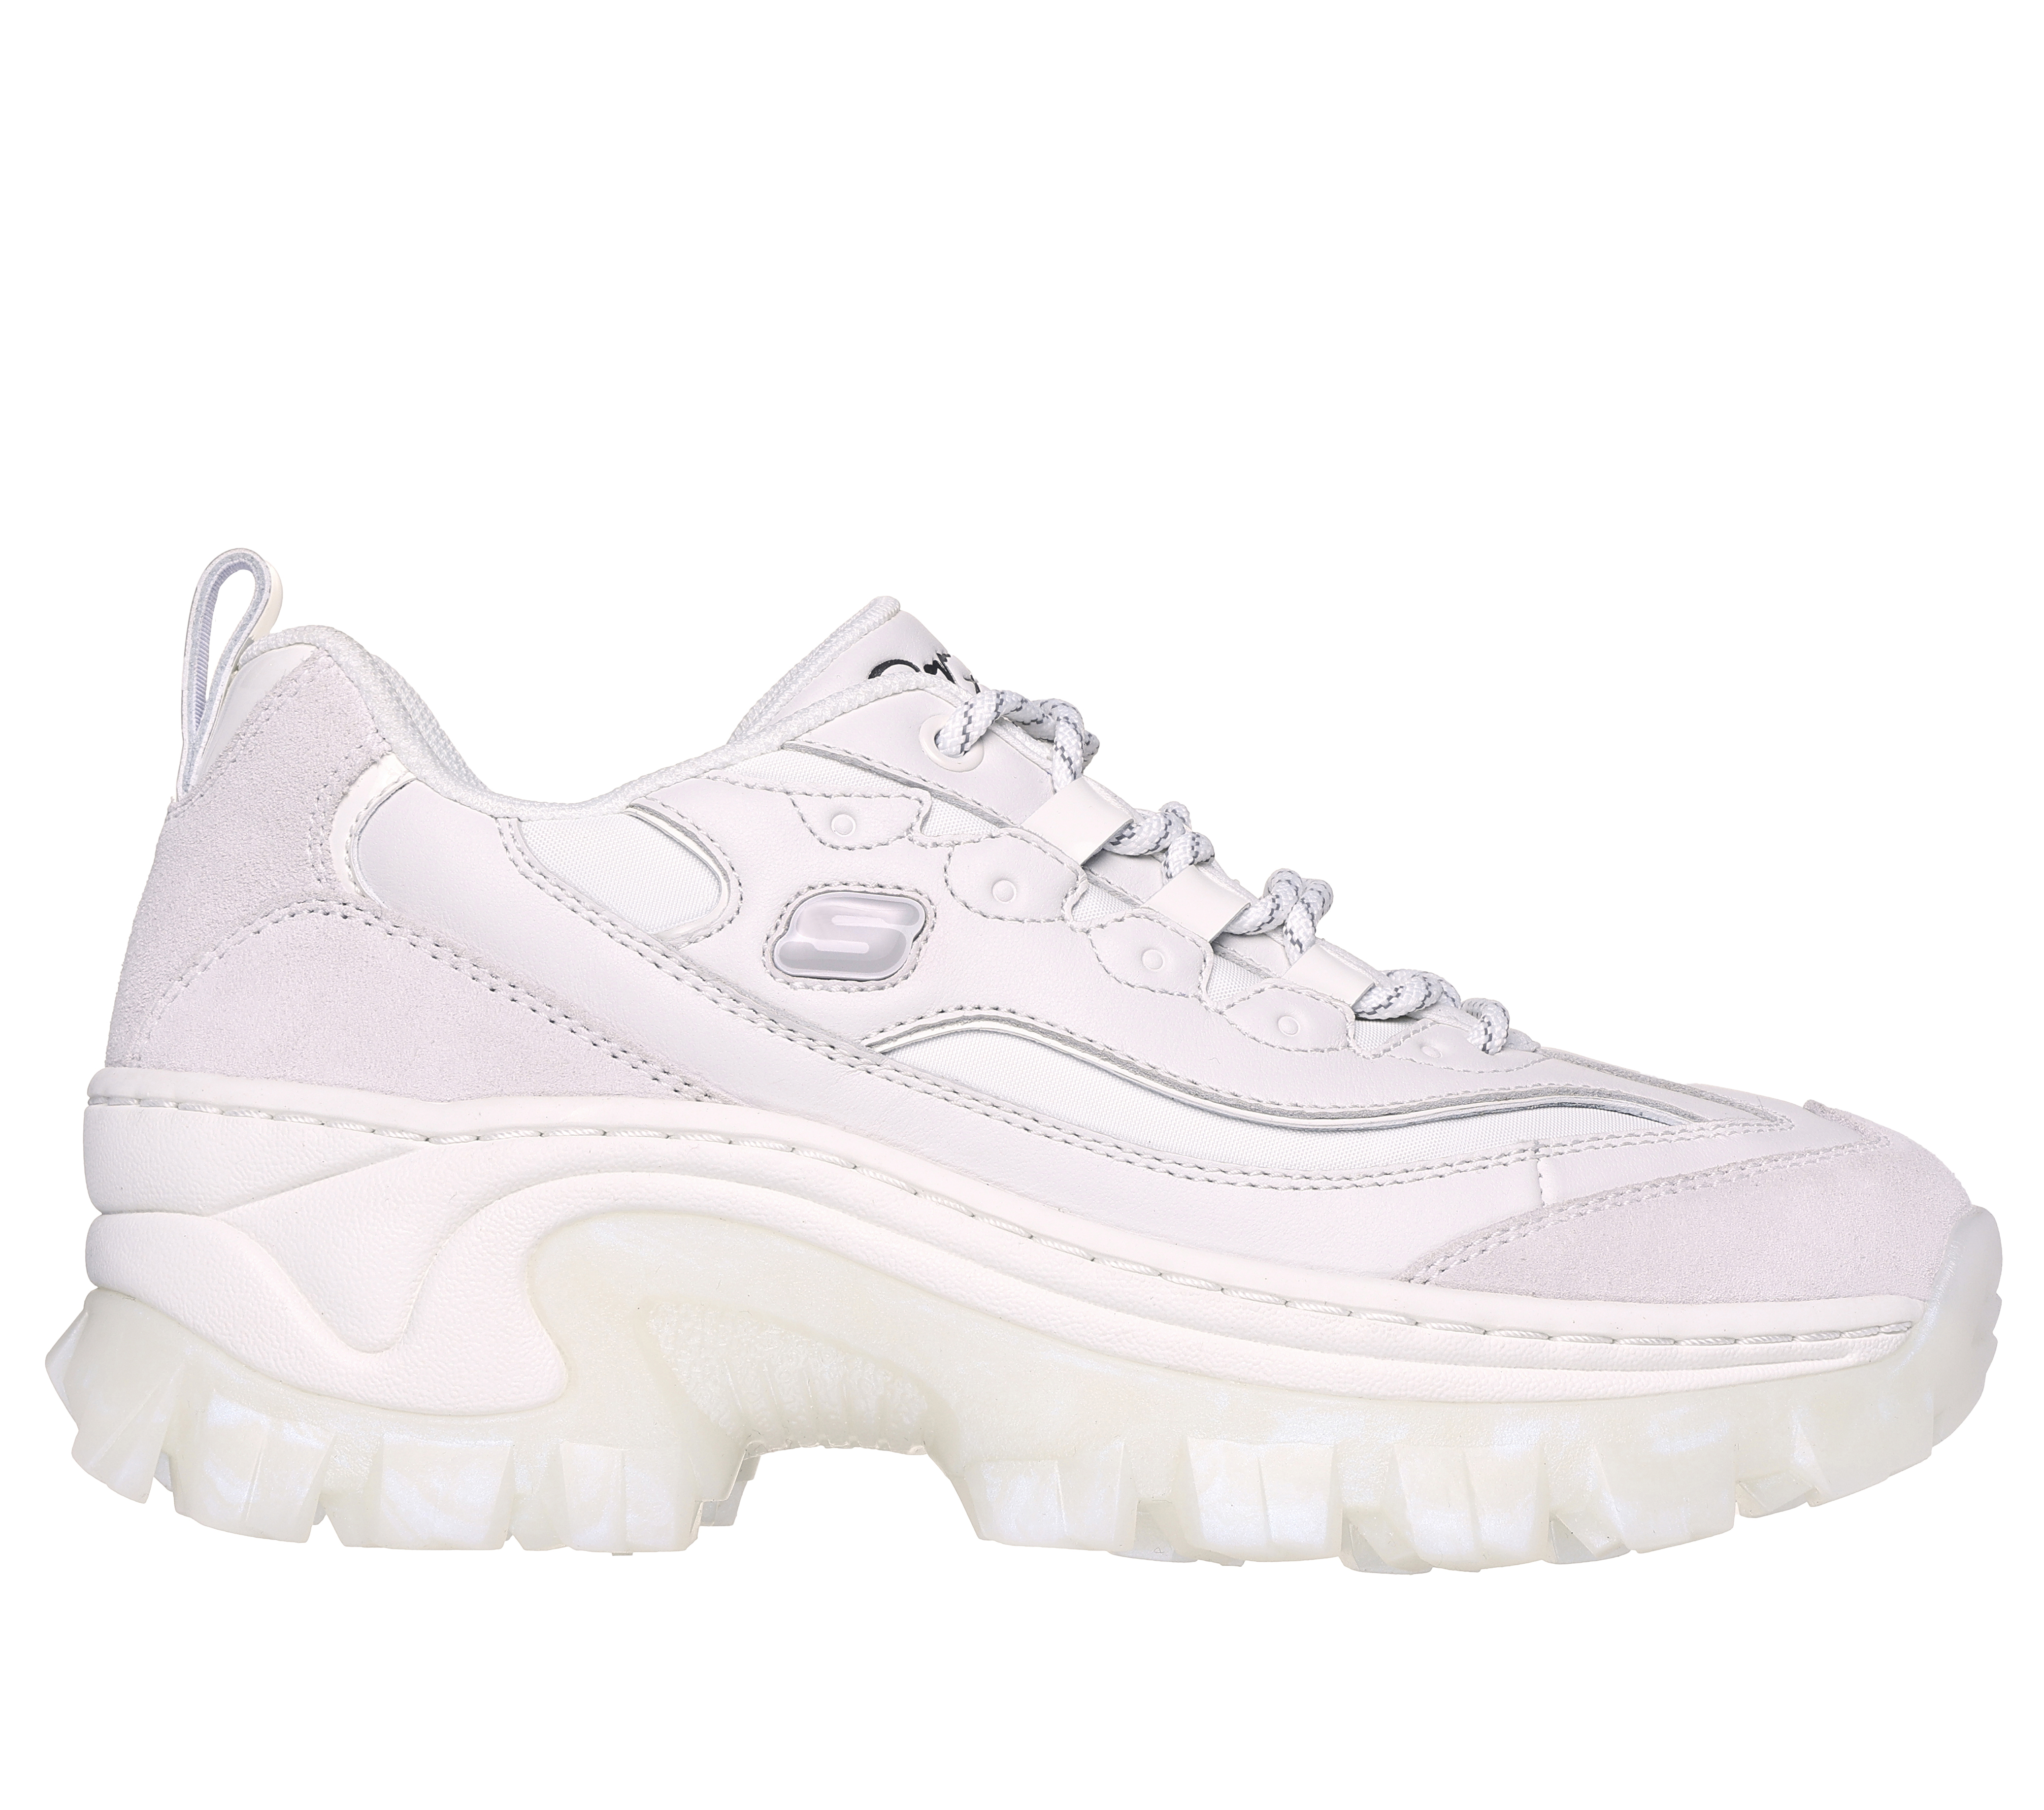 The Skechers x Doja Cat Collaboration Is Here